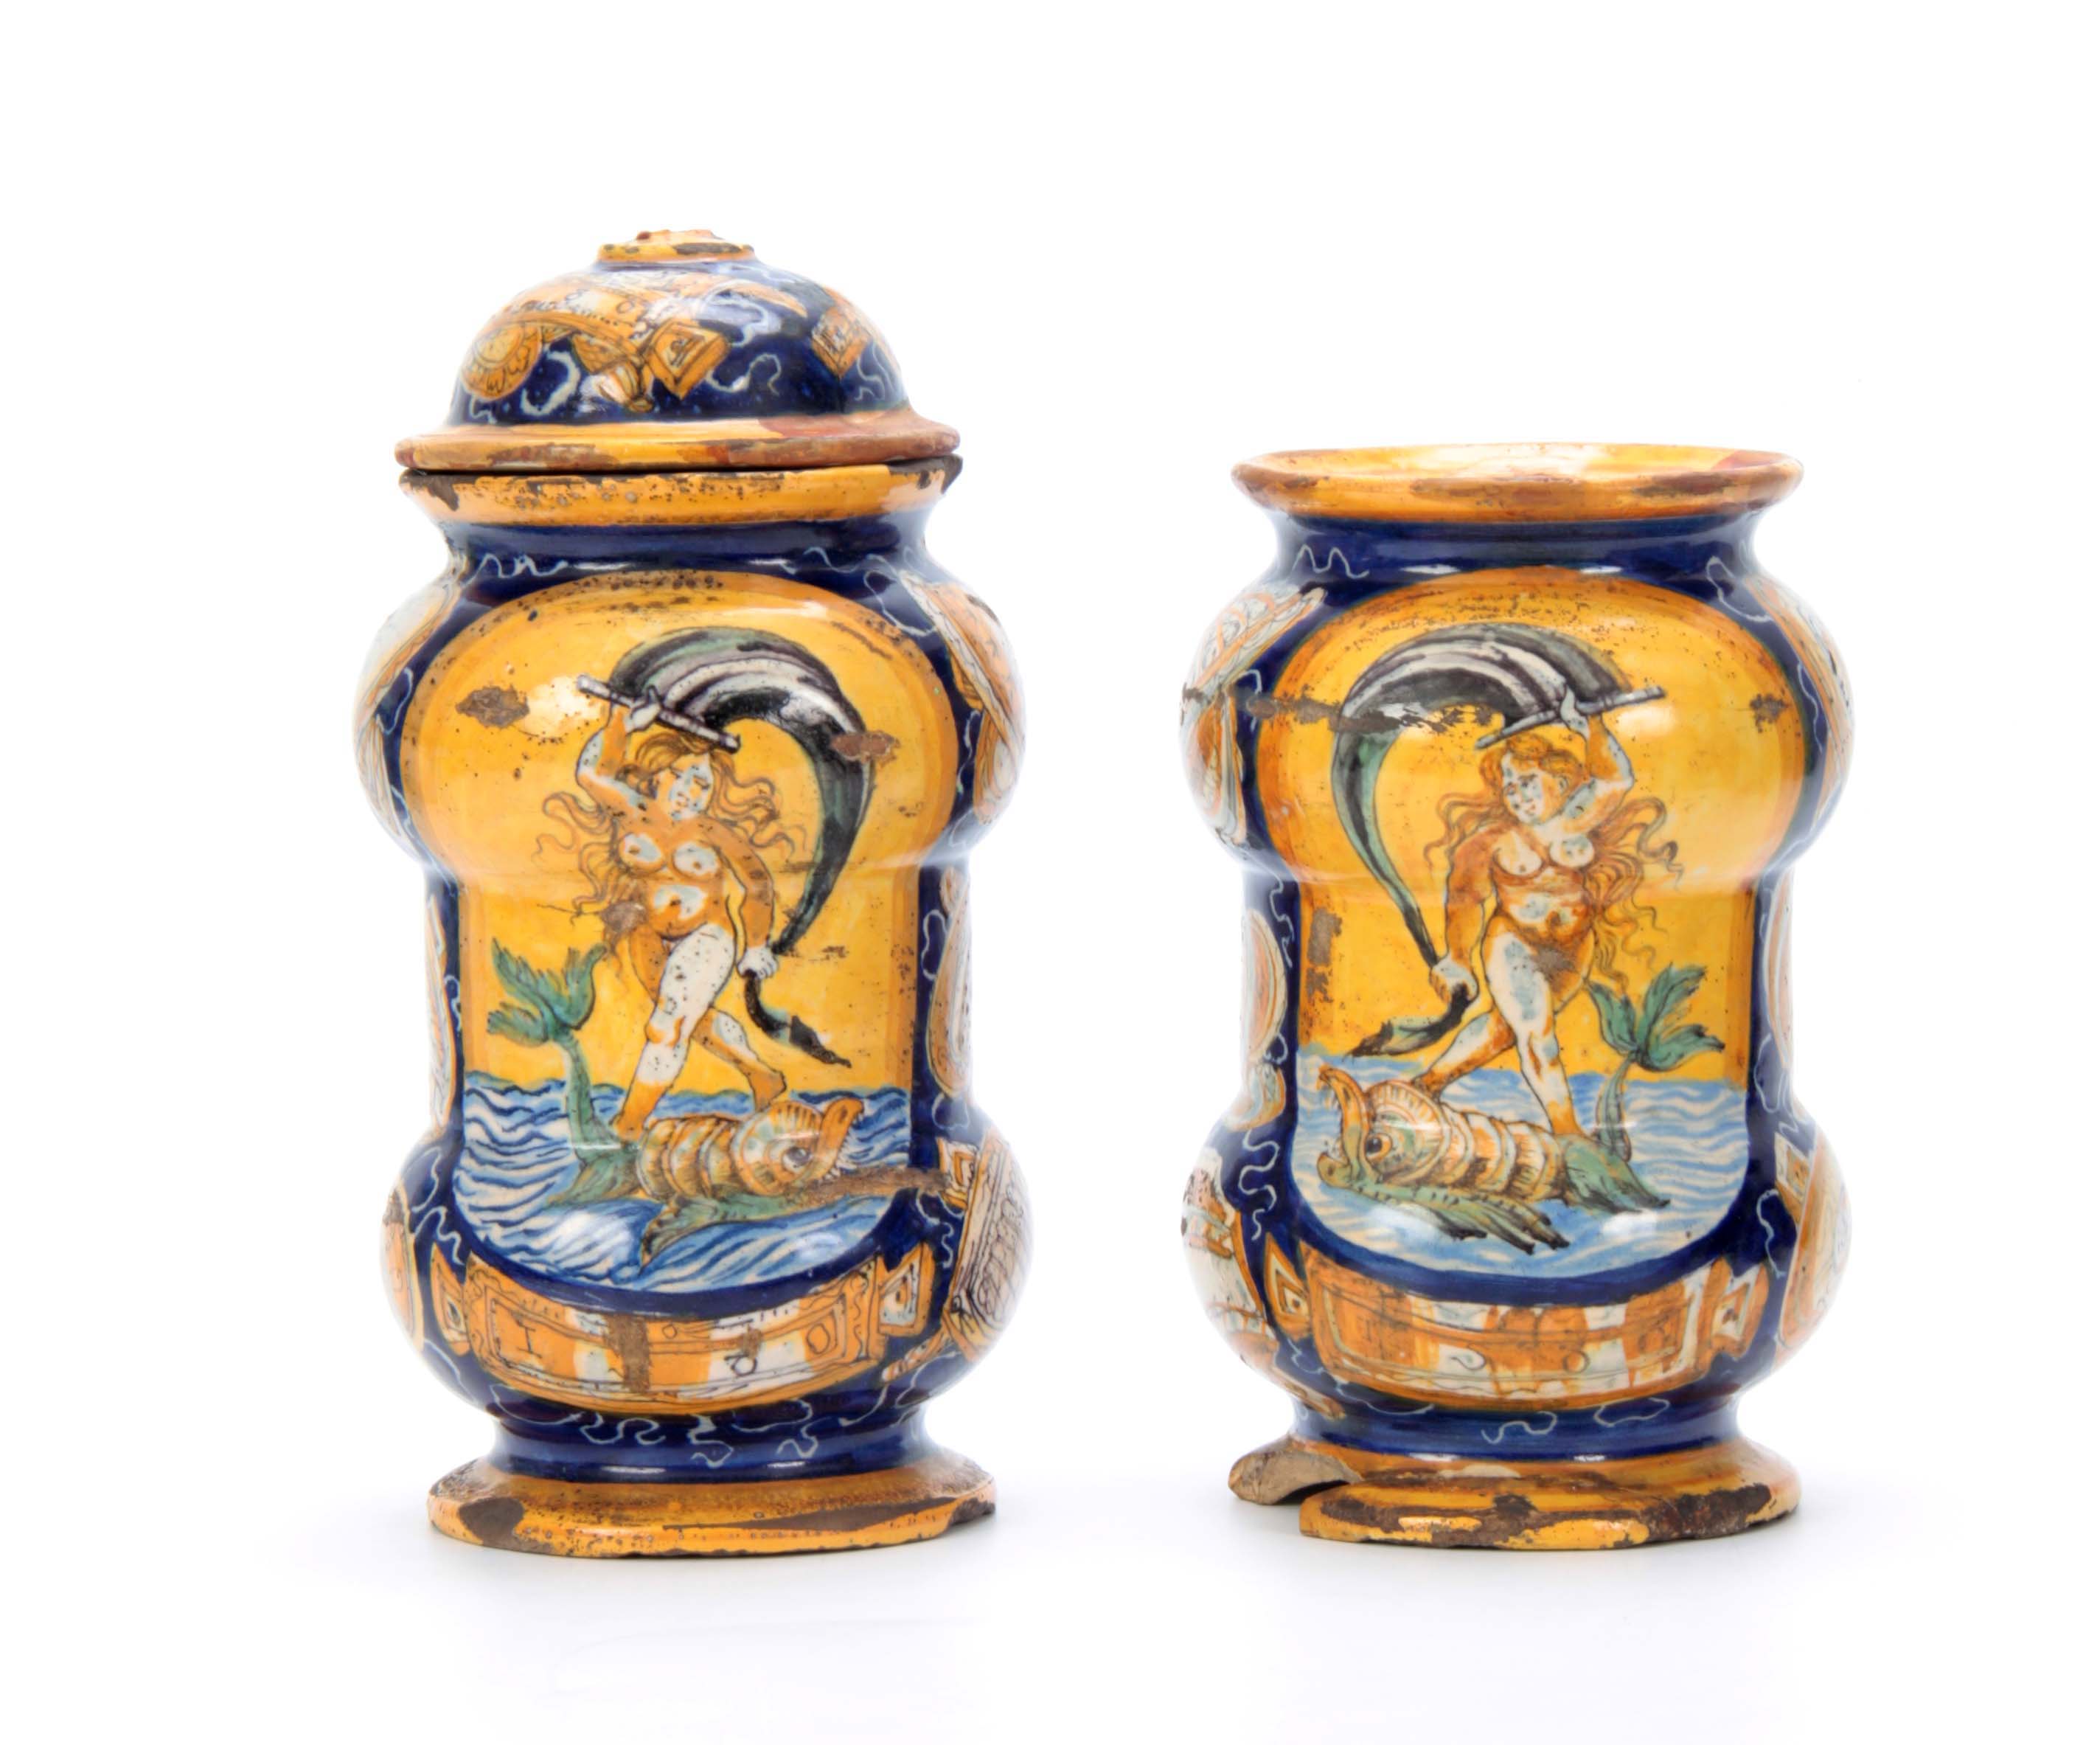 A PAIR OF CASTEL DURANTE MAIOLICA ALBARELLI DATED 1580 each painted with Venus riding a dolphin